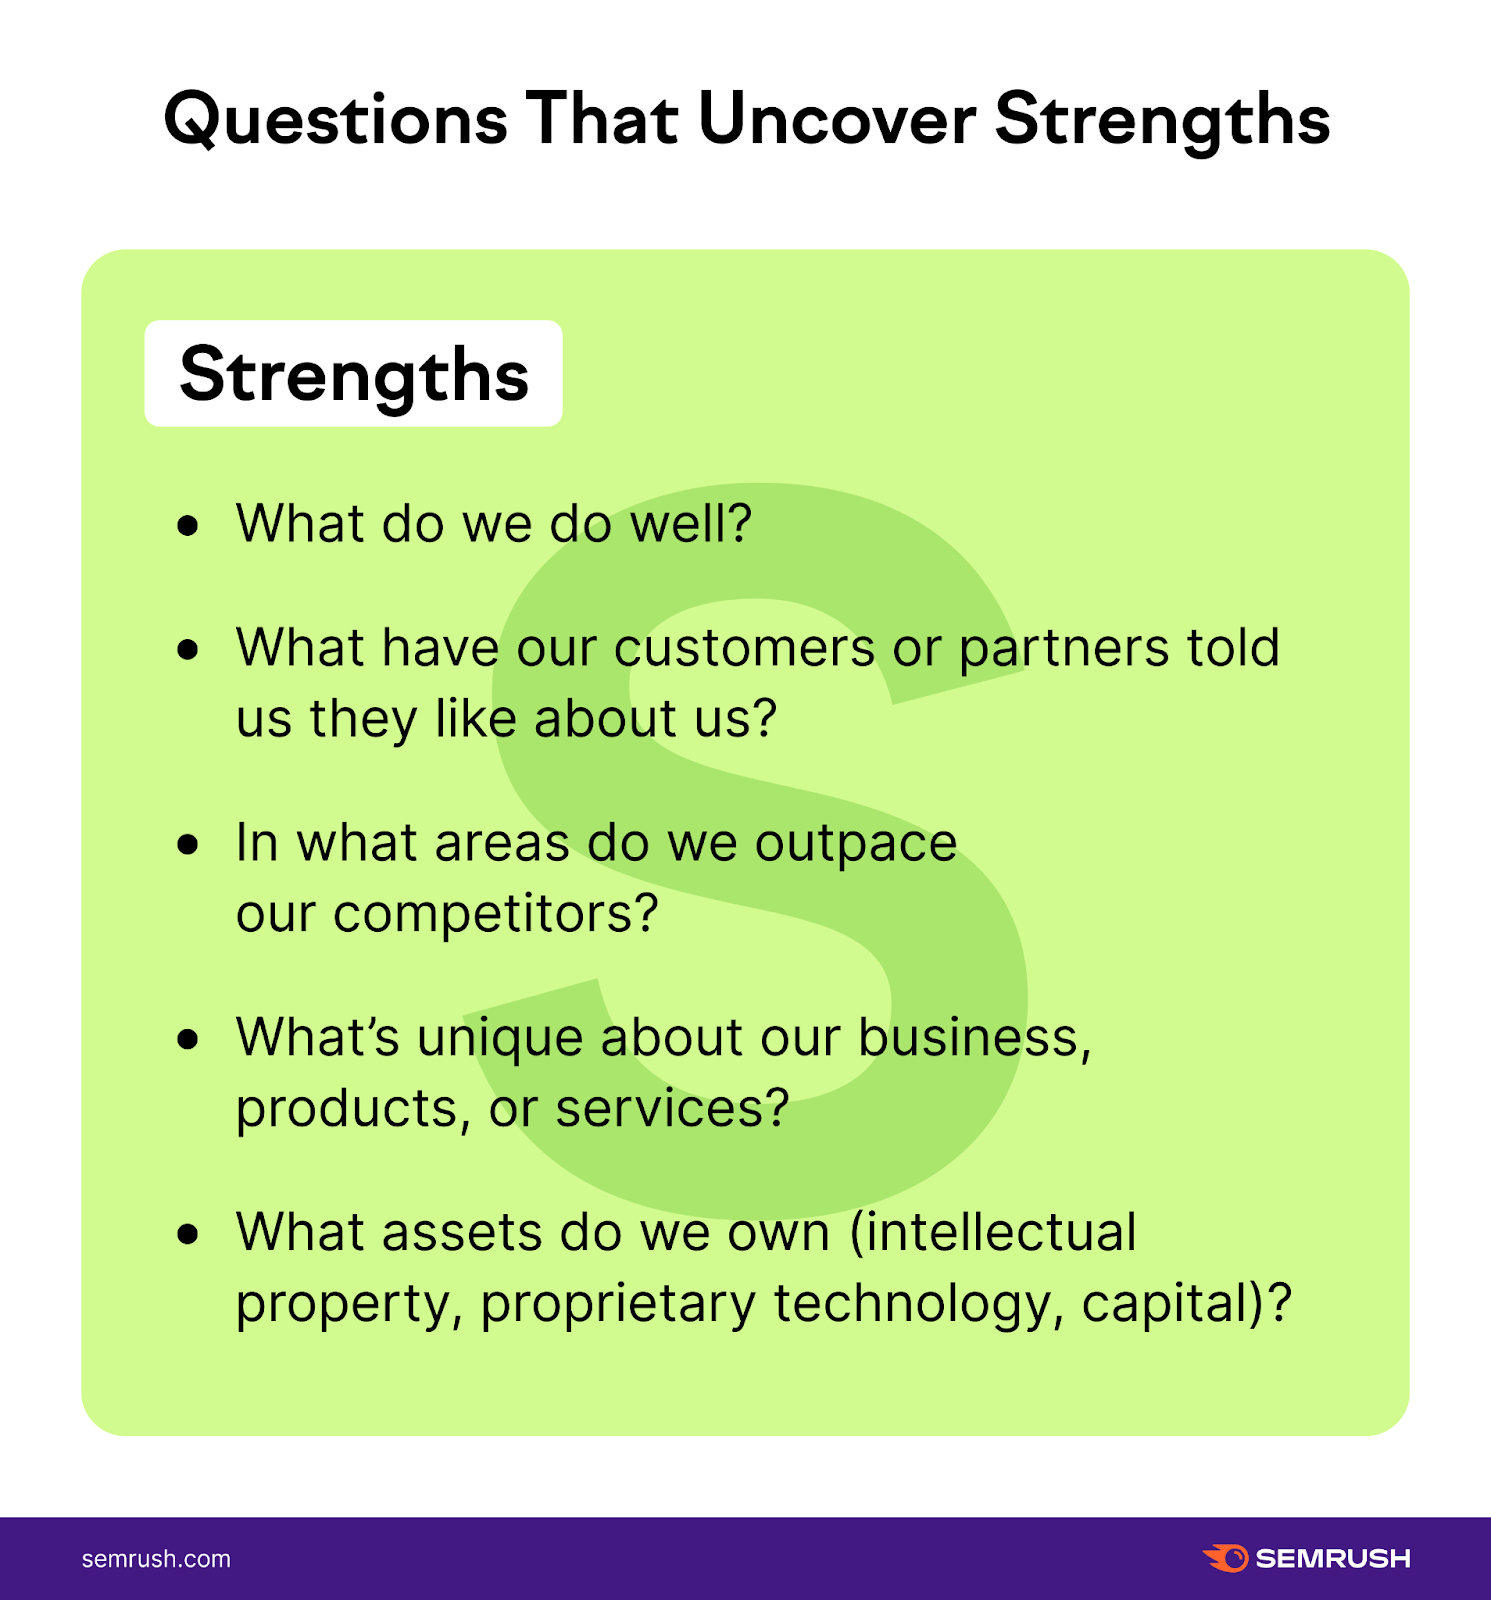 Five questions that uncover strengths